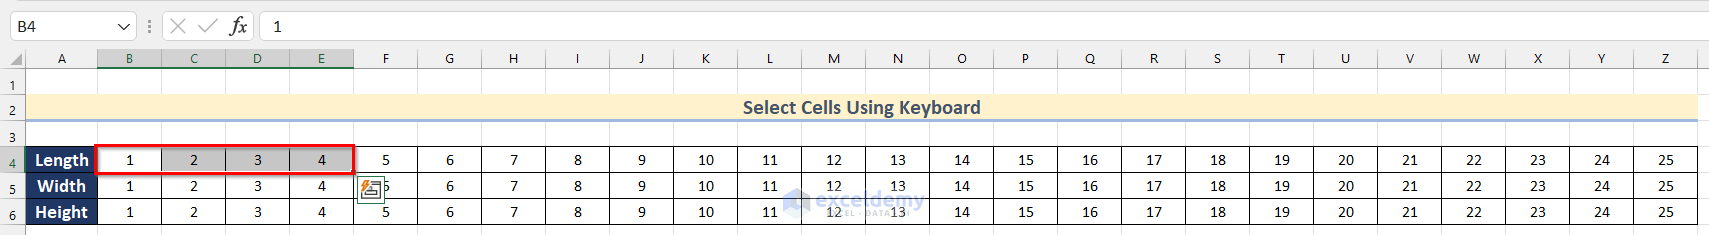 1. Select Cells